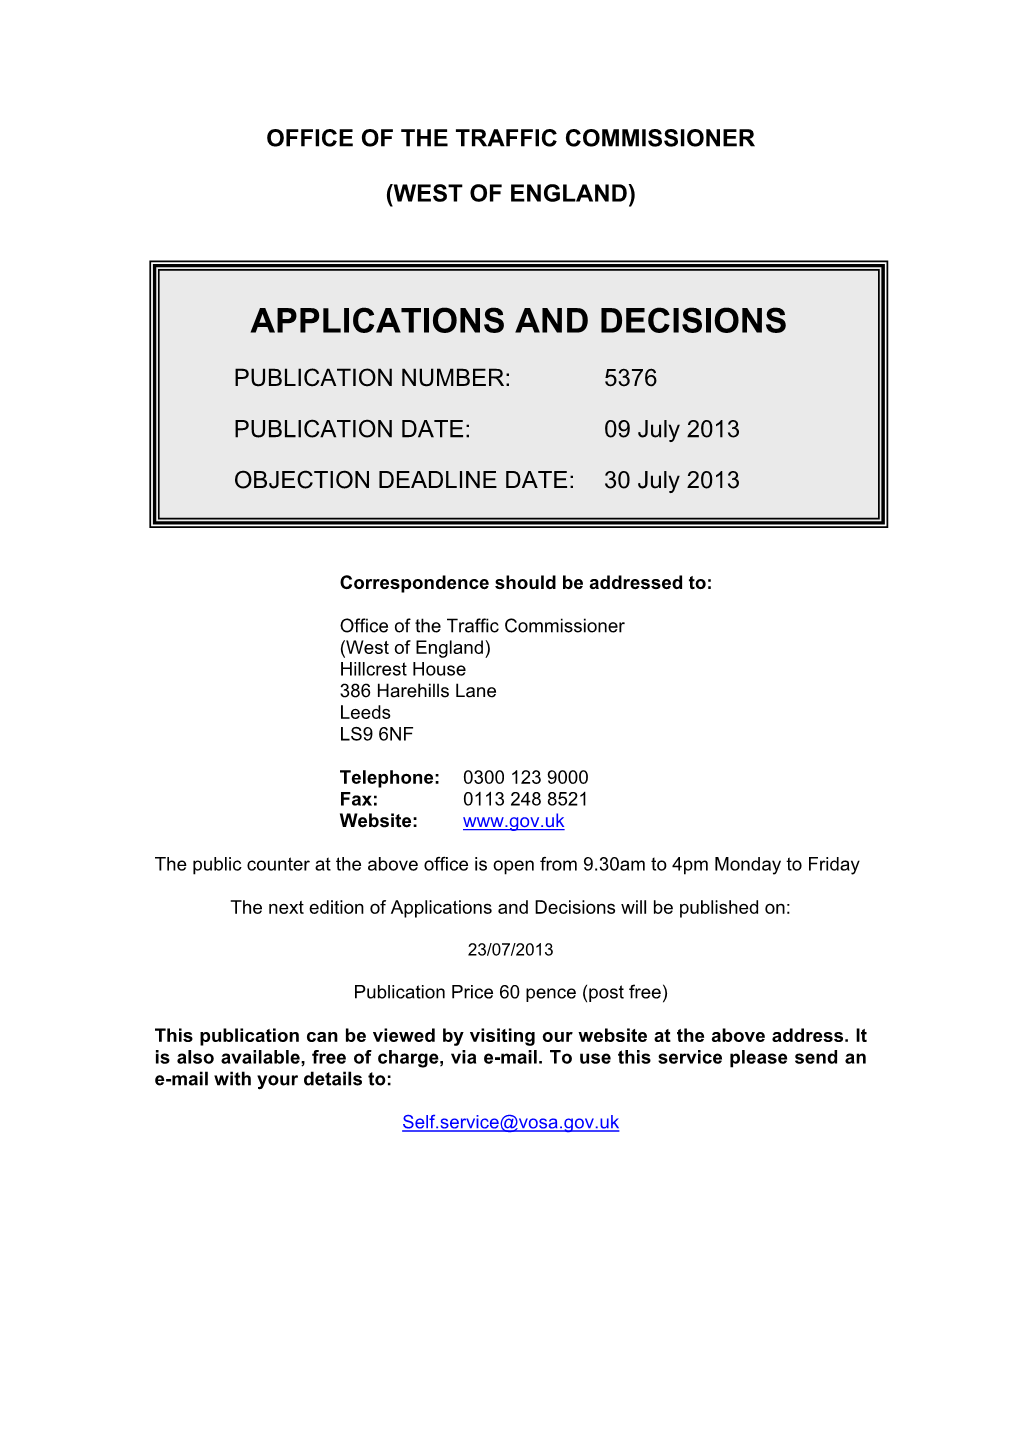 Applications and Decisions: West of England: 30 July 2013